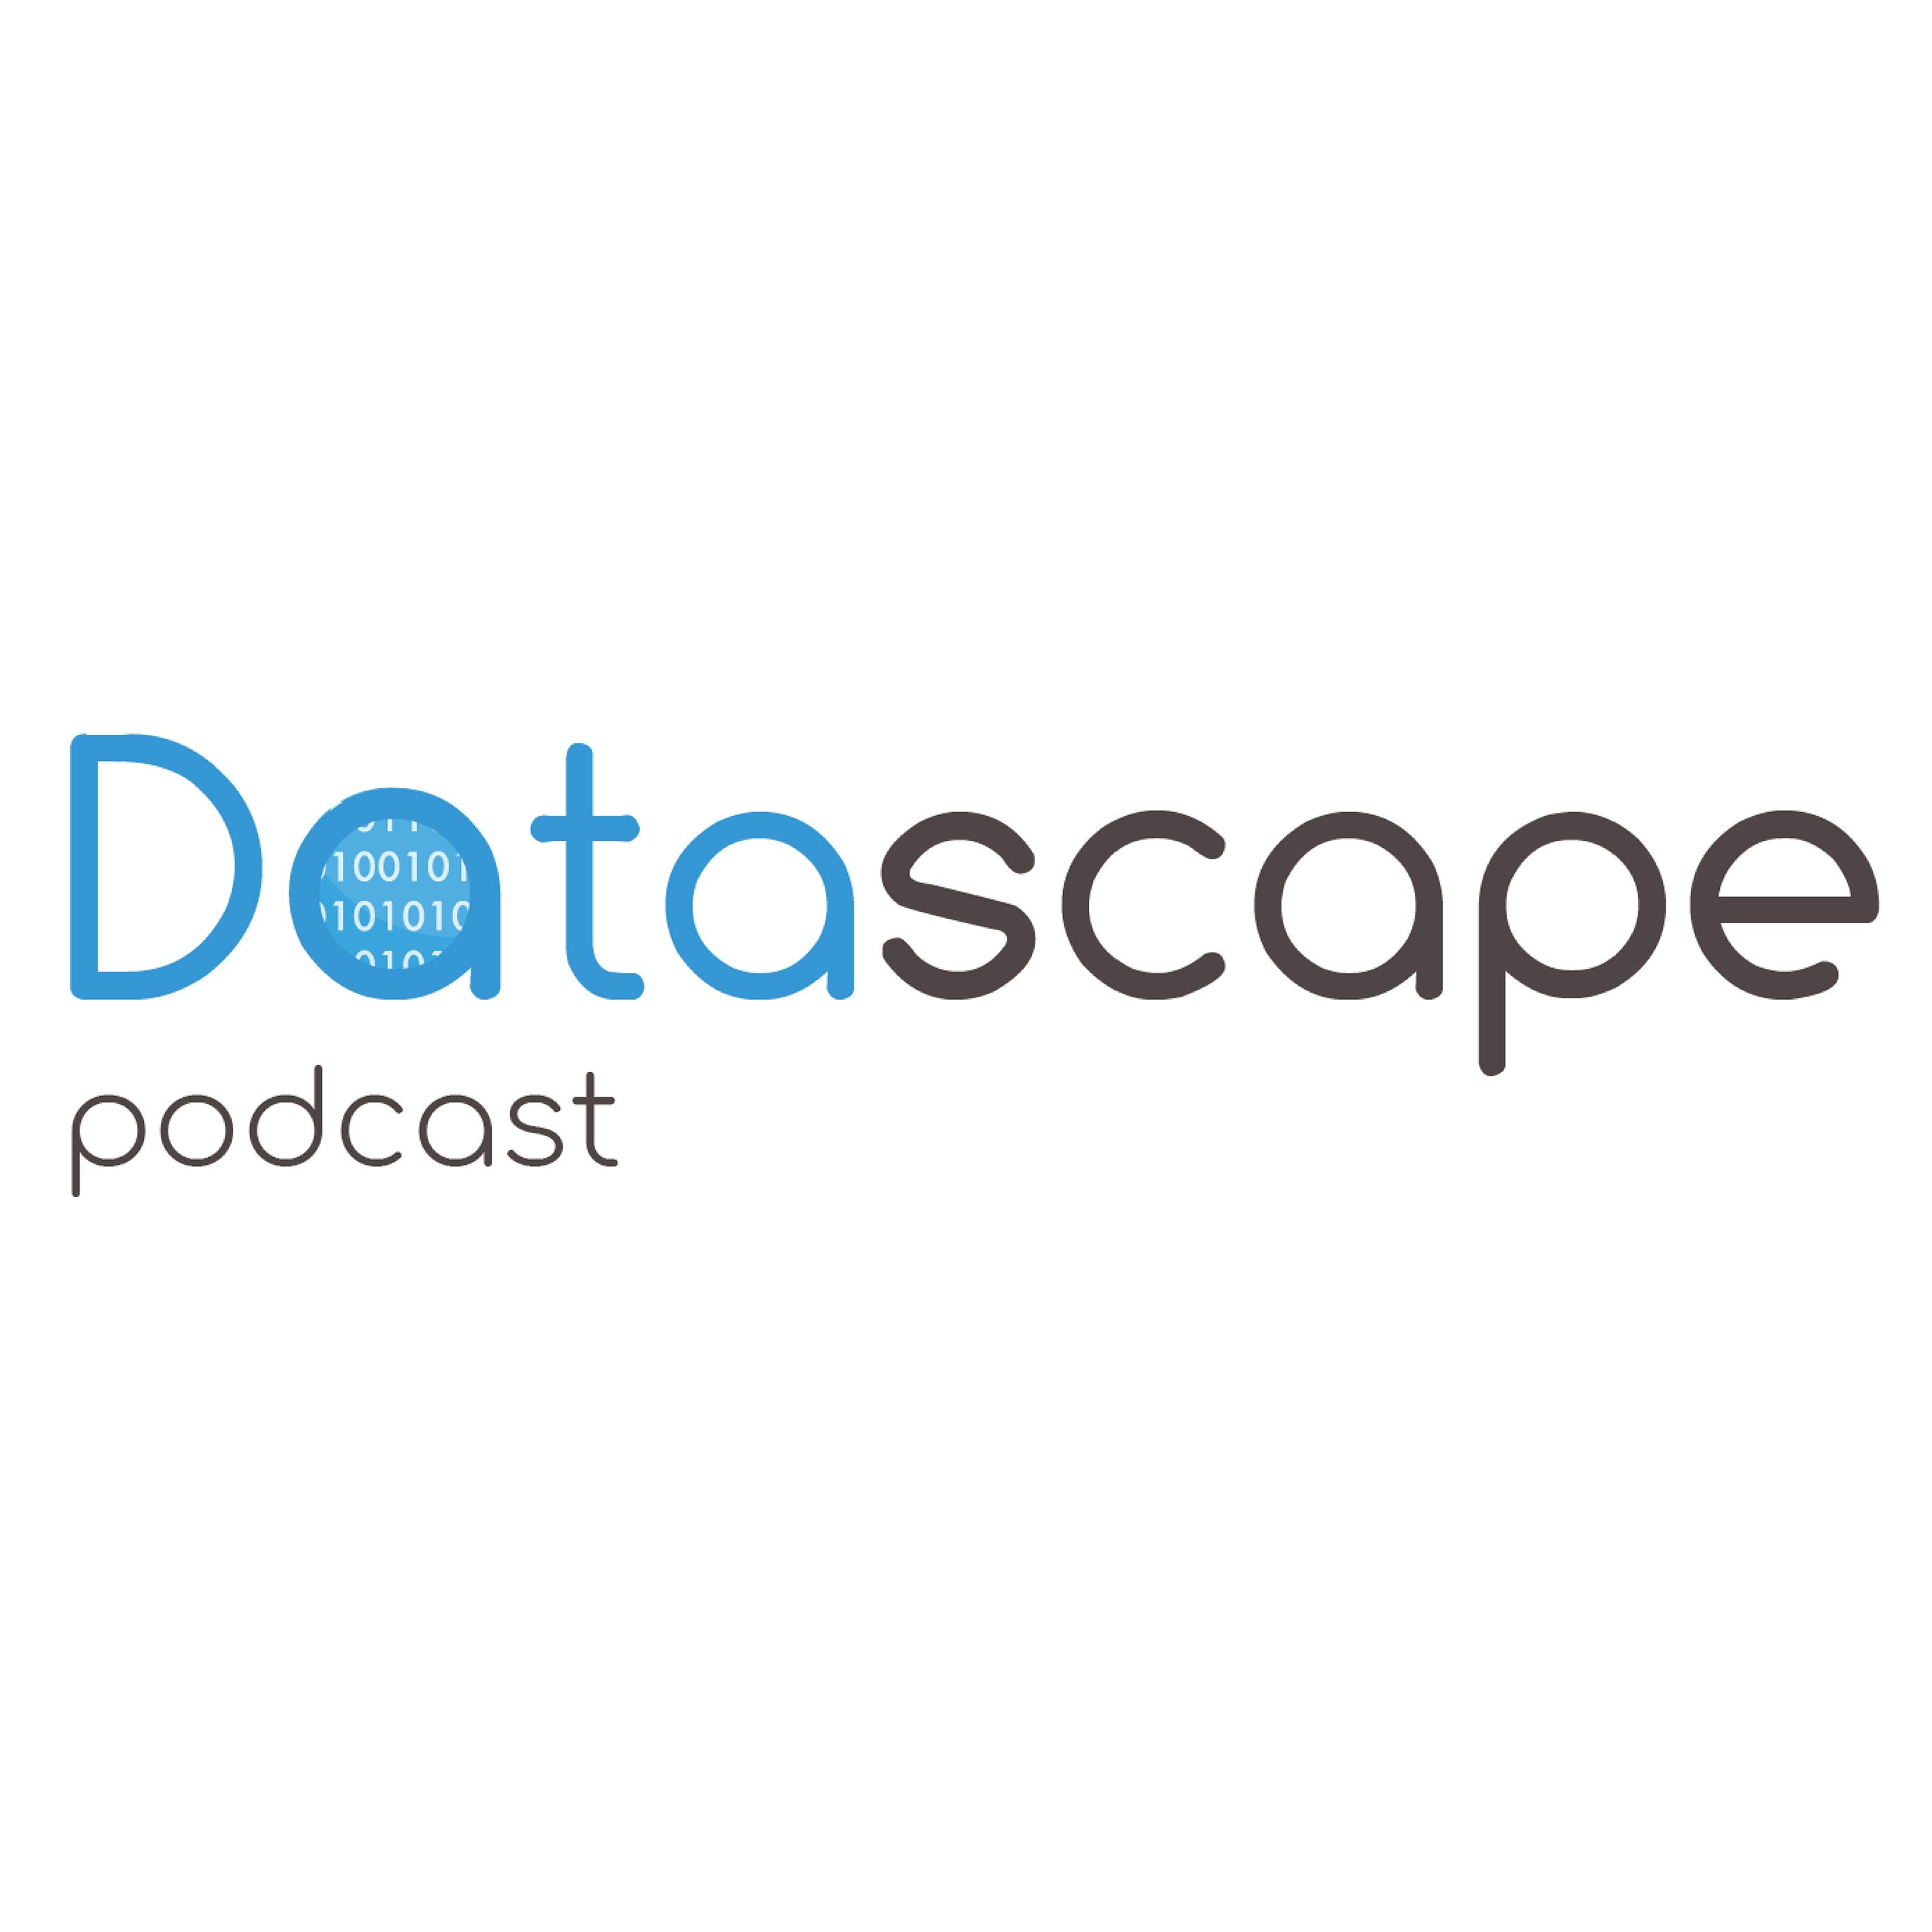 Datascape Podcast